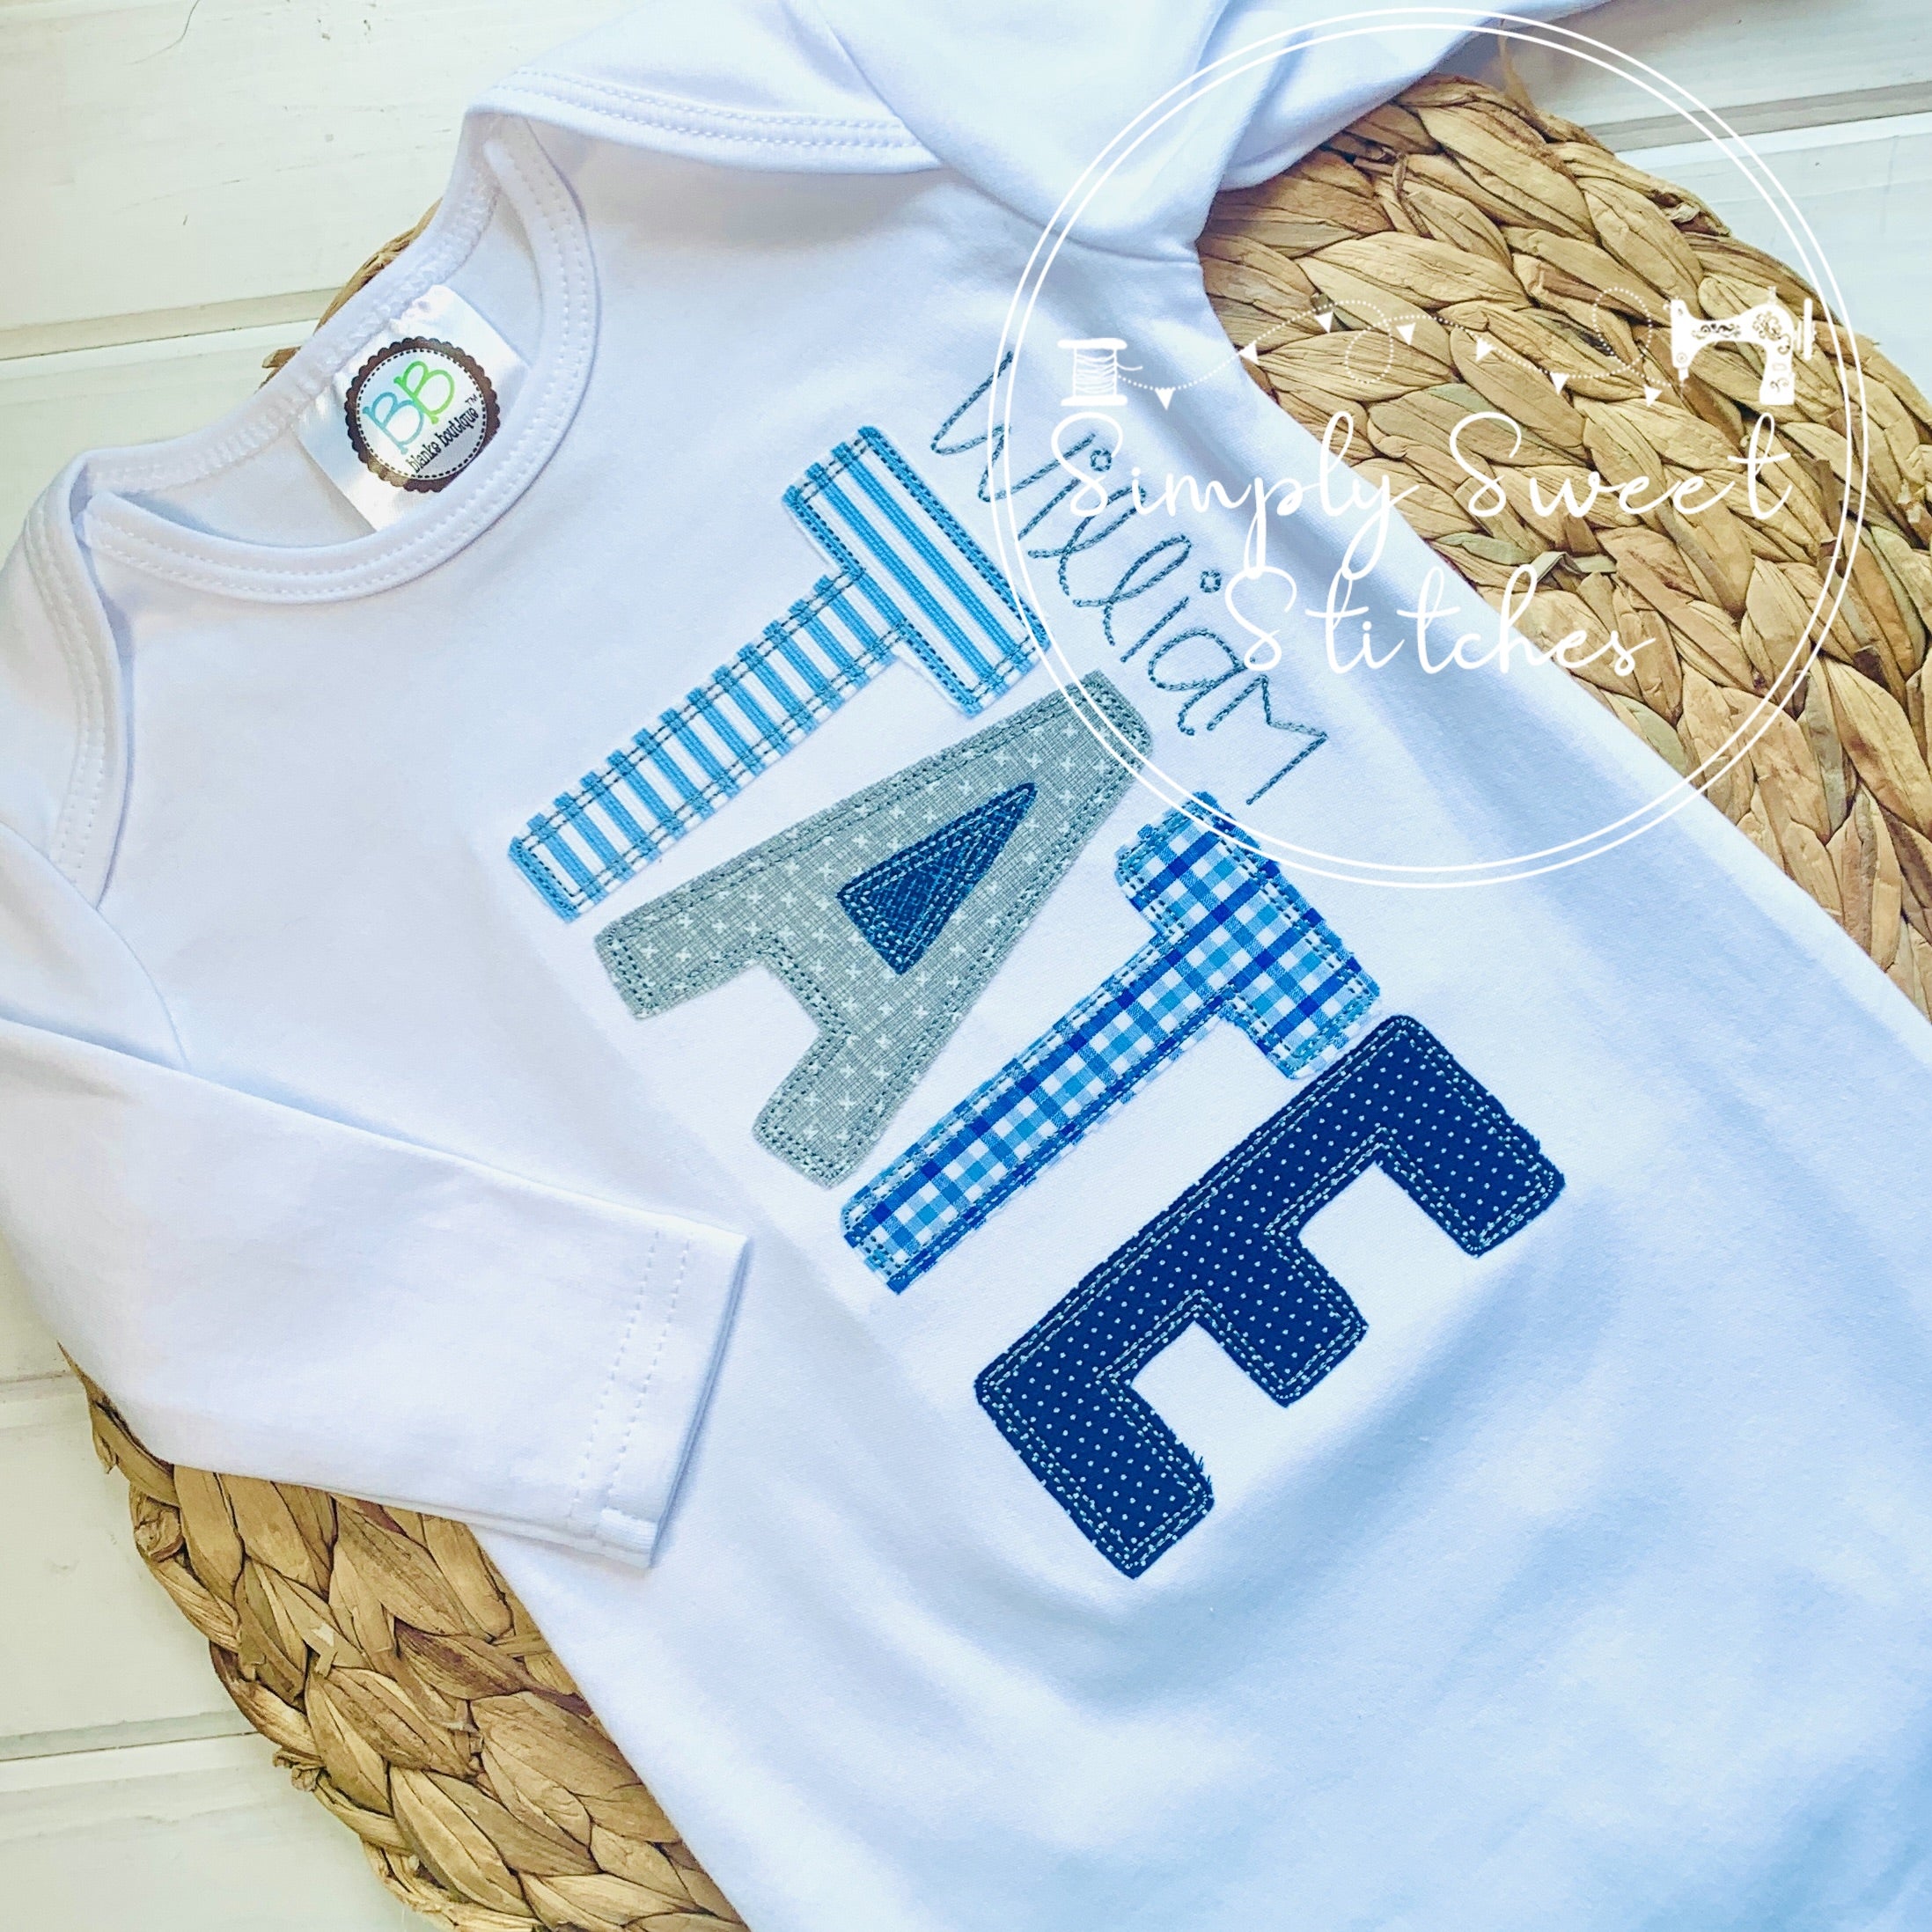 Personalised Baby Gifts | Unique Baby Presents | Bumbles & Boo